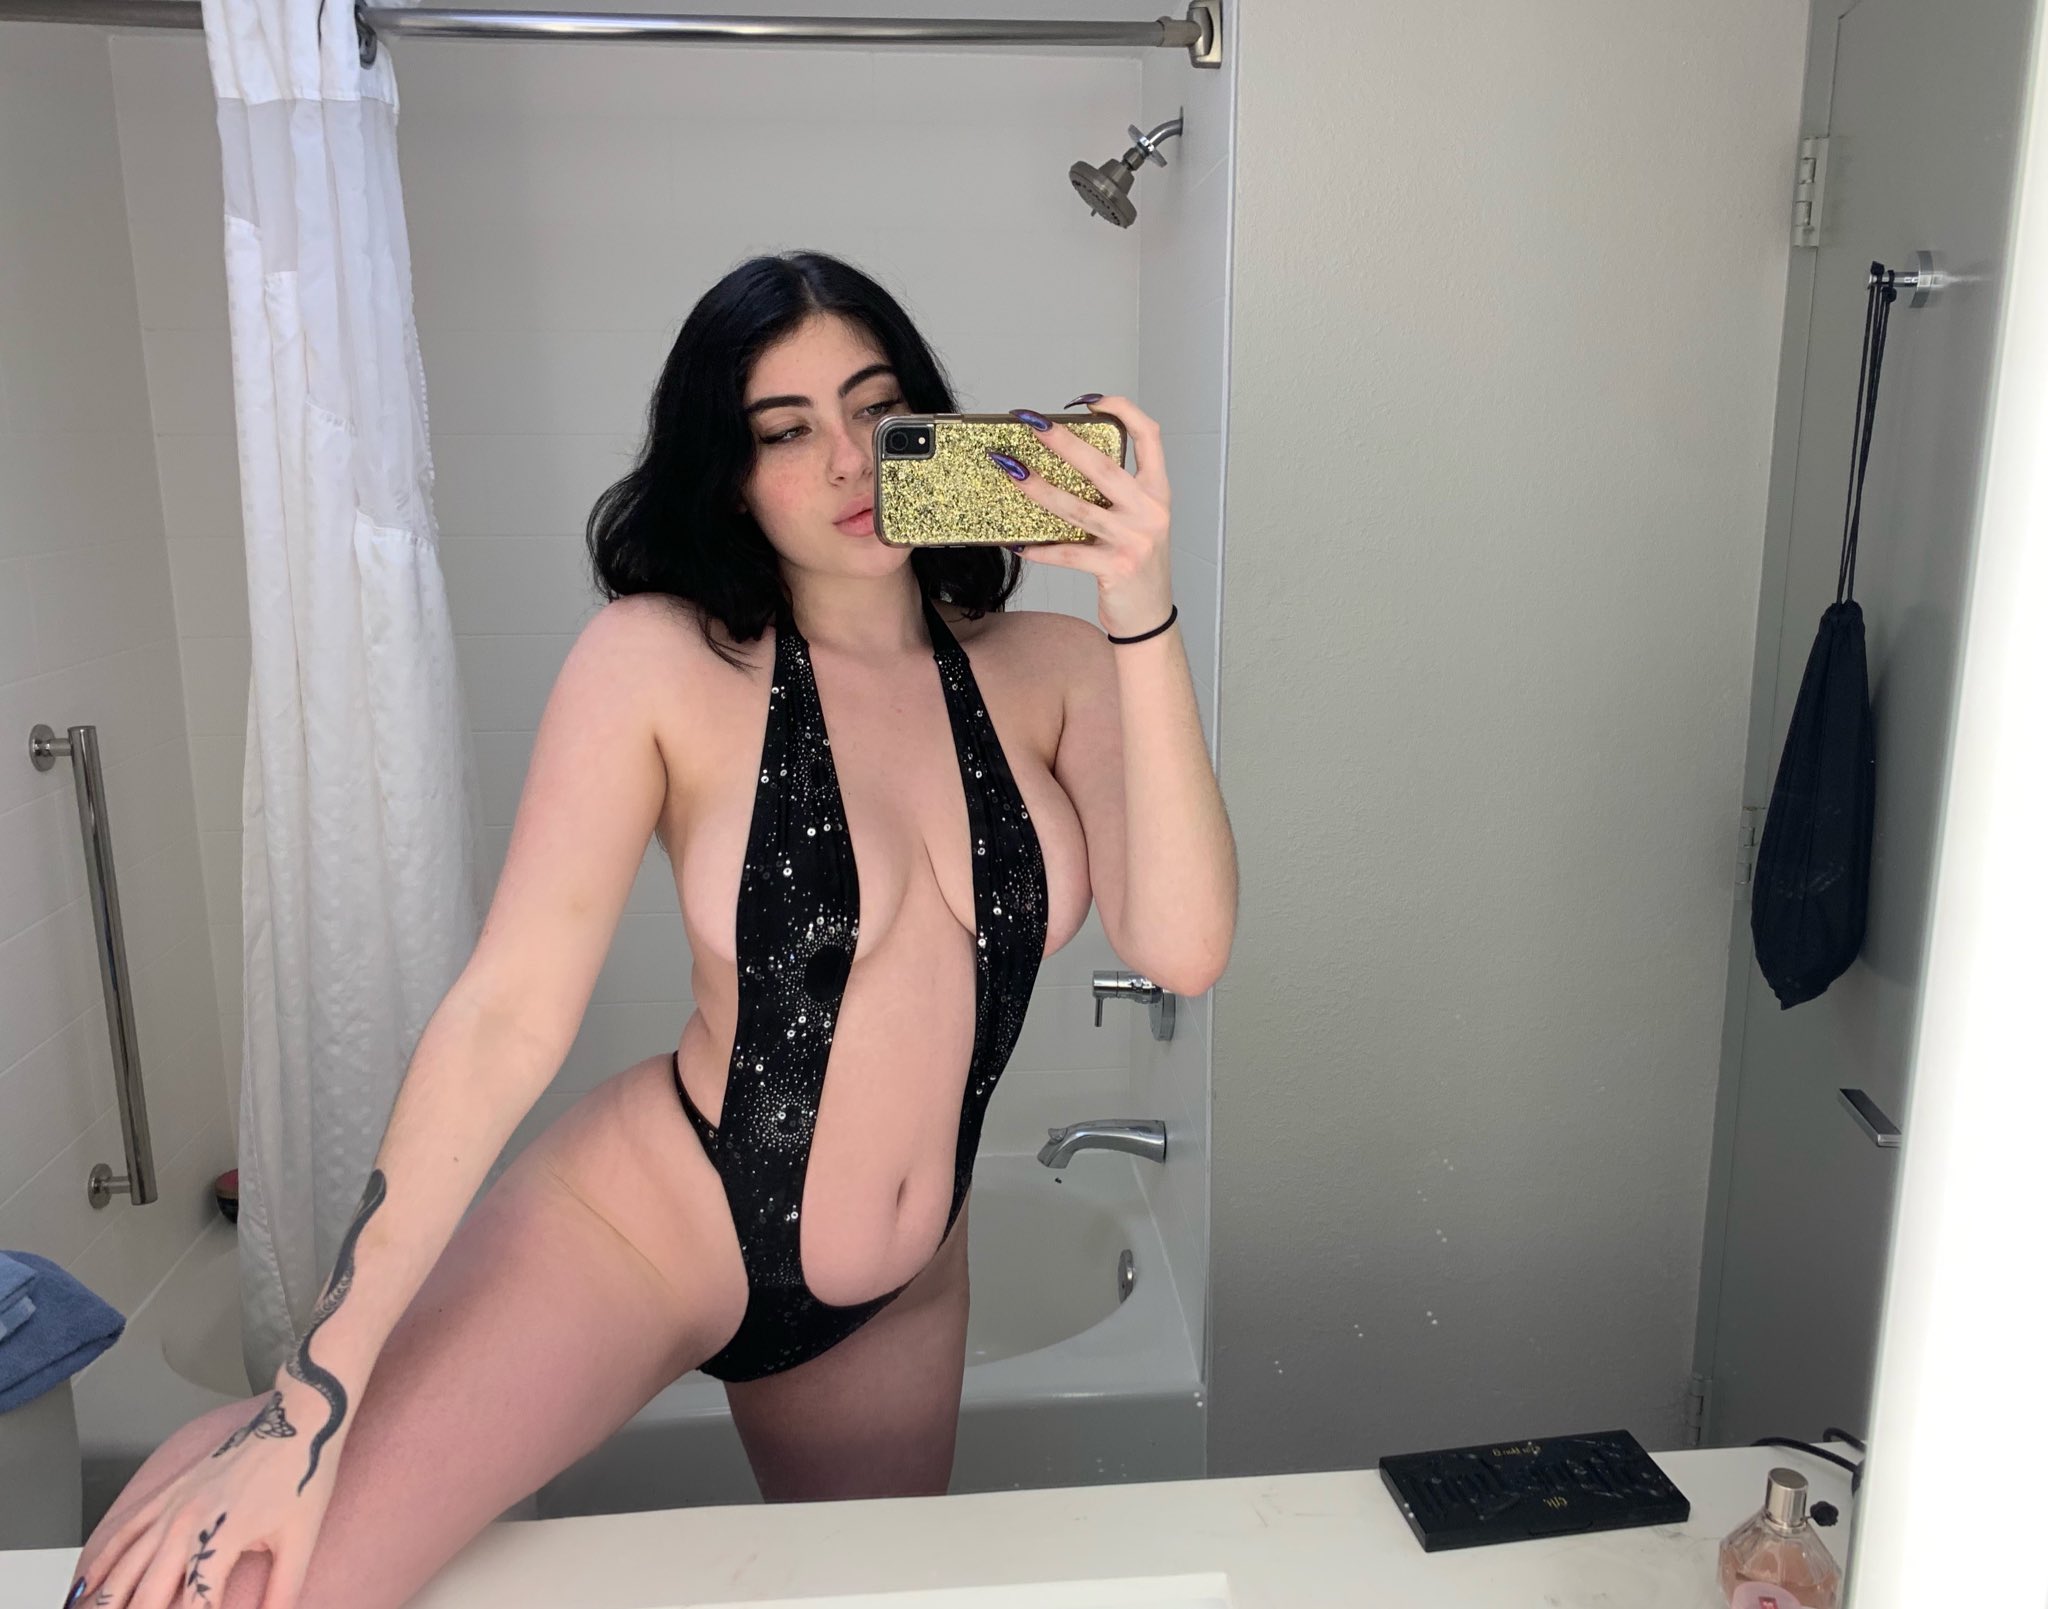 Immoralfairy Nude Leaked Videos and Naked Pics! 84